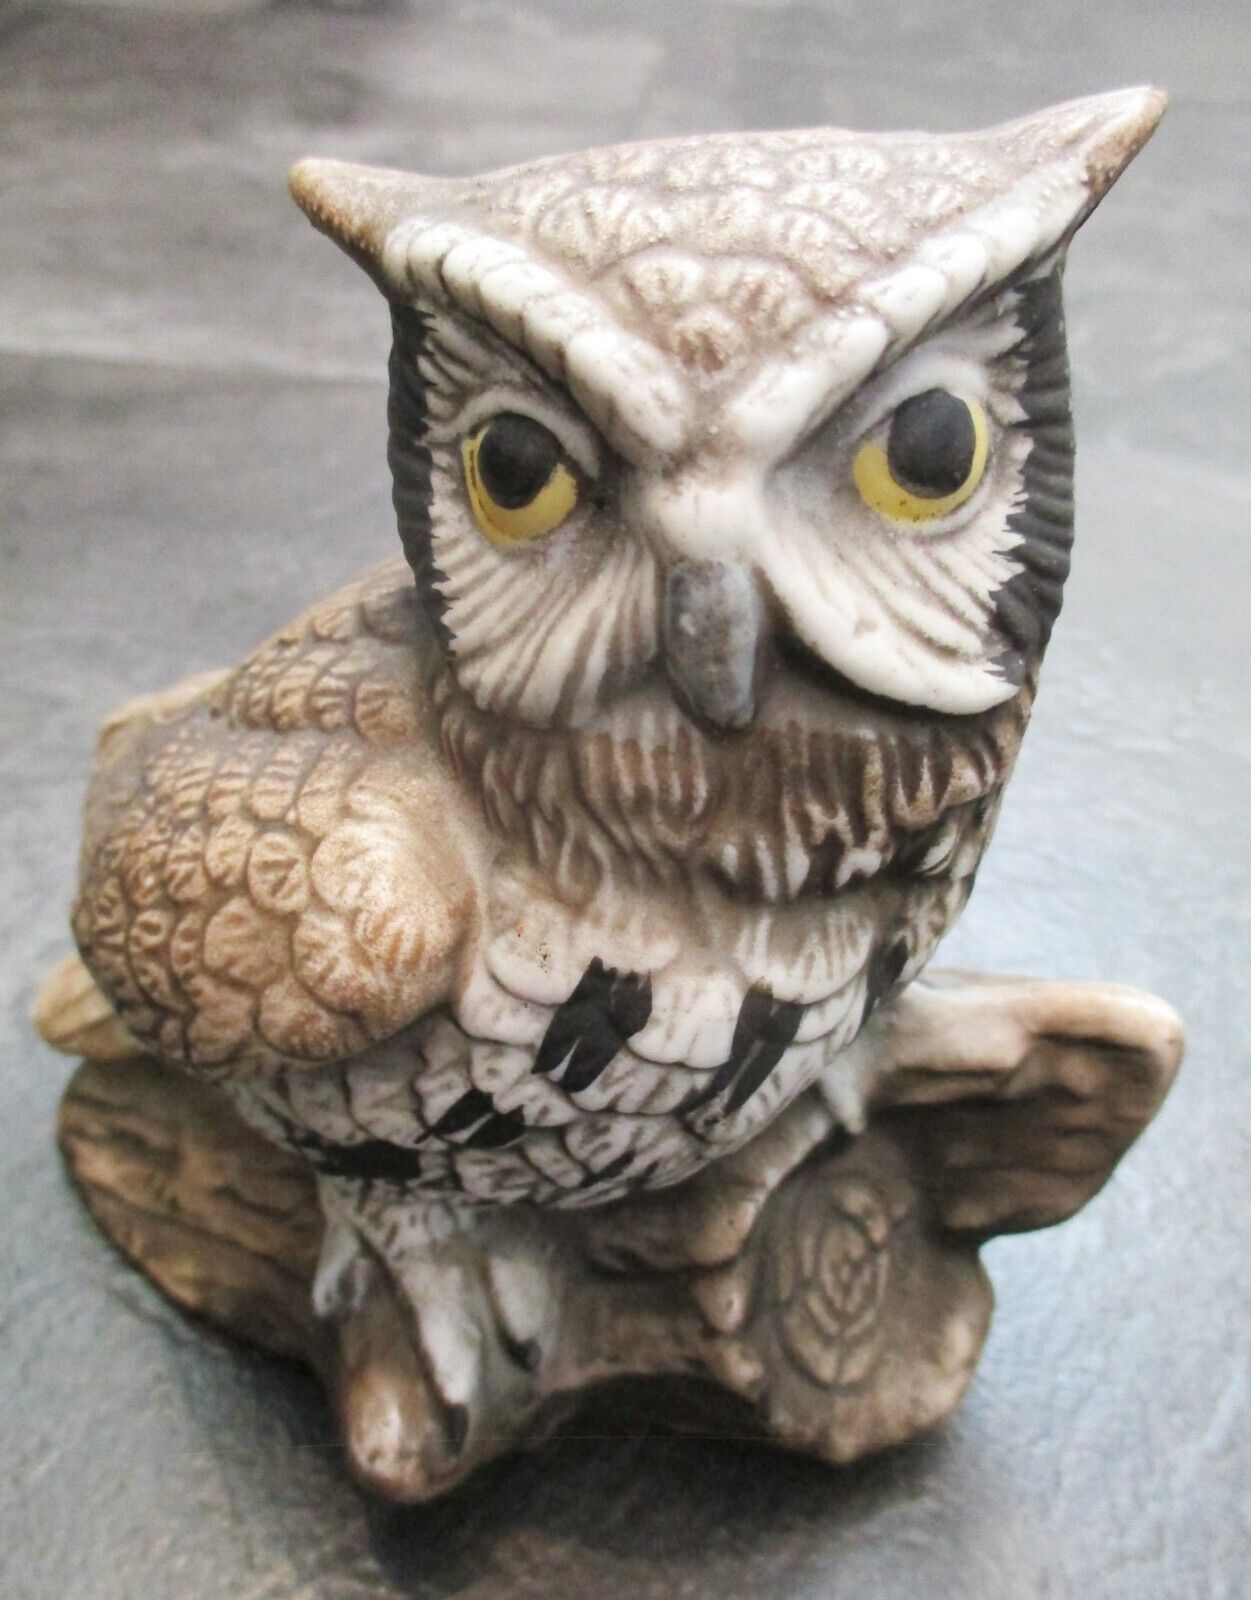 Vintage Homco Horned Owl Marked 1114 Ceramic Collectible Figurine